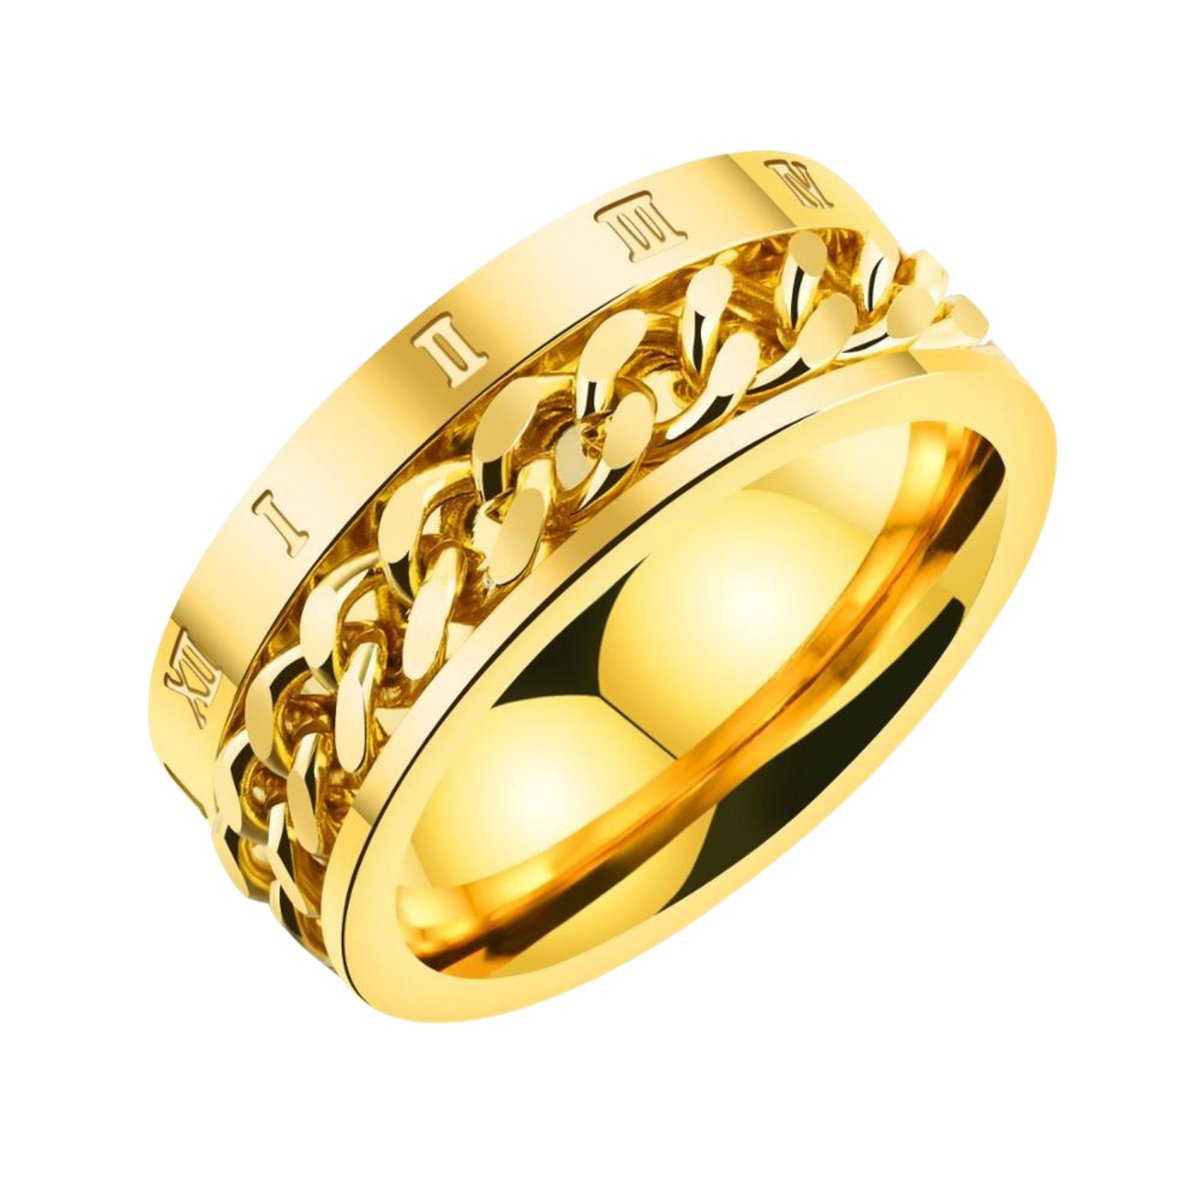 Anxiety Ring - (Rome) - Stress Ring - Fidget Ring - Anxiety Ring For Finger - Draaibare Ring - Spinning Ring - Goud - (22.00 mm / maat 69)